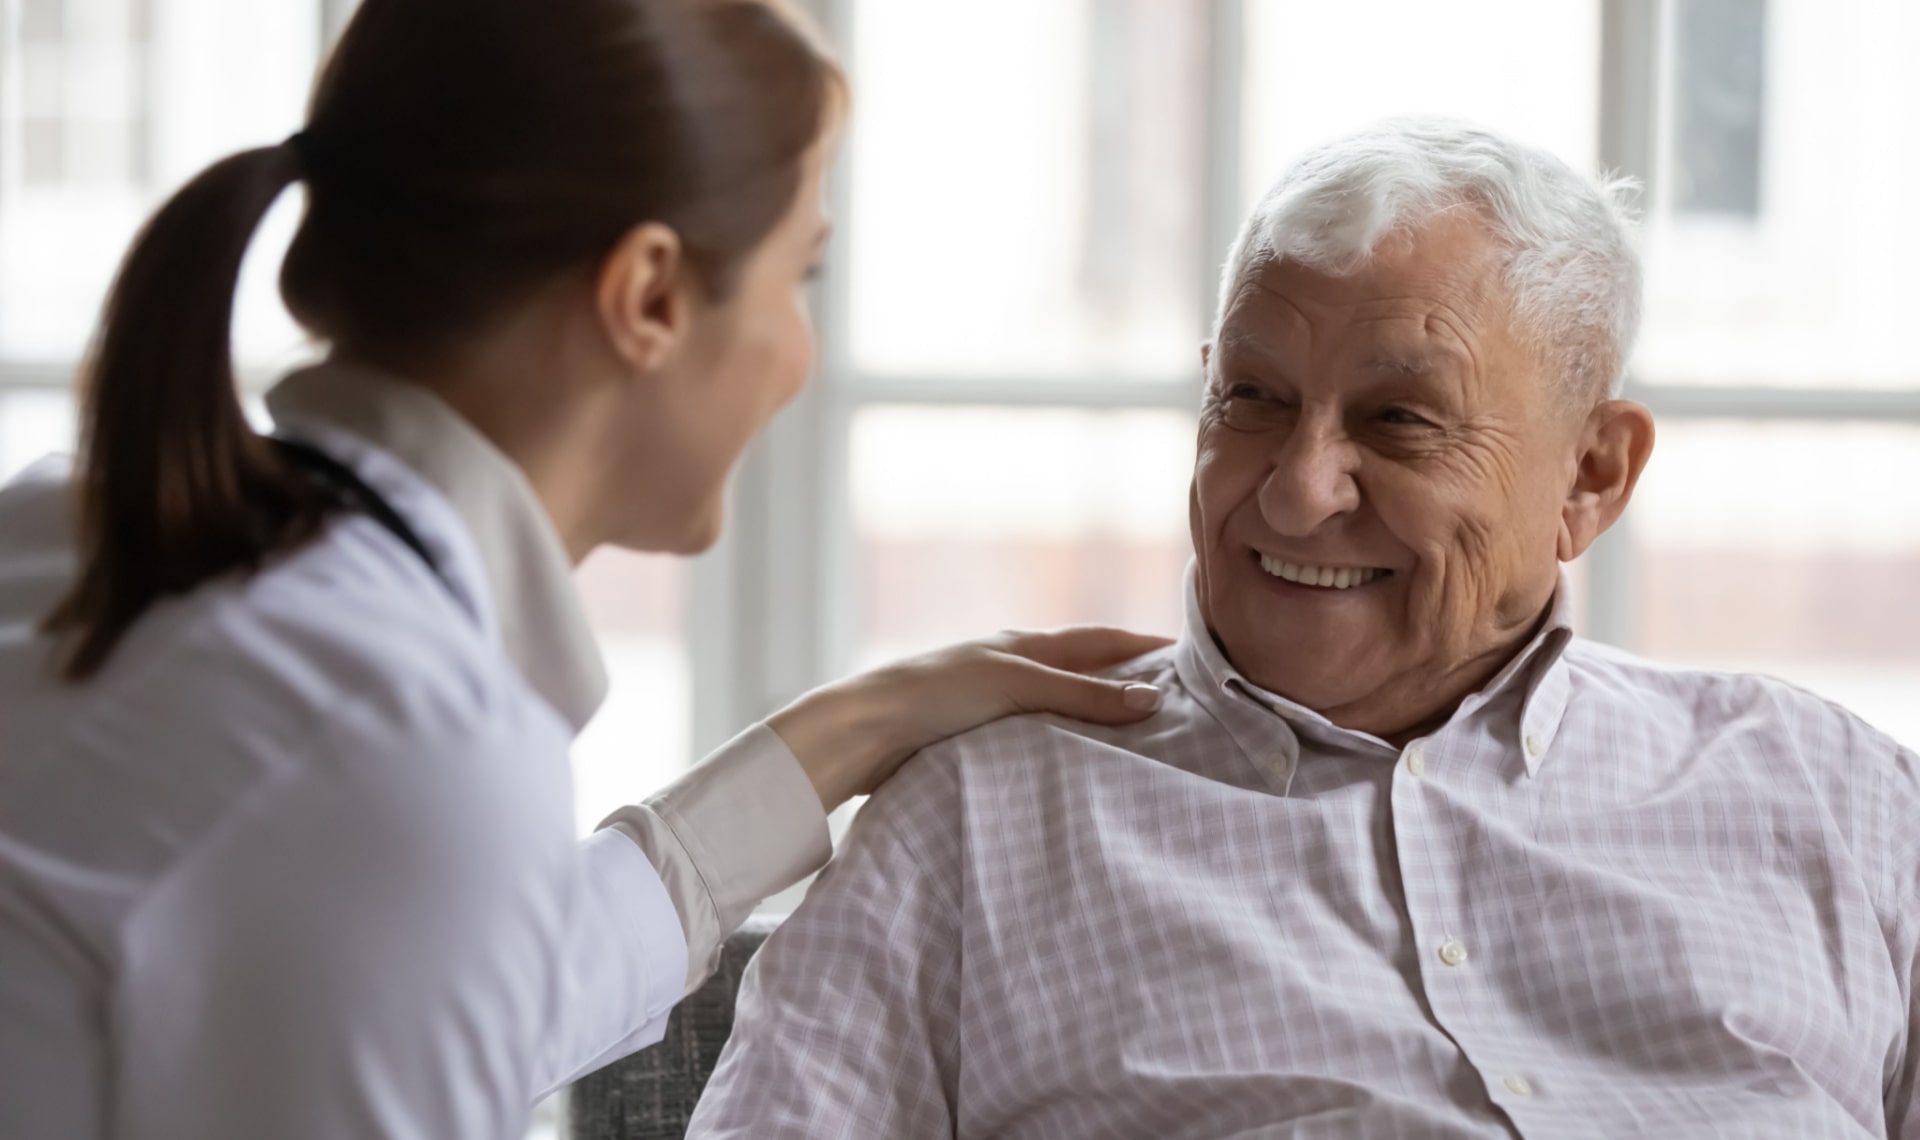 Caring geriatric nurse in white coat cares for grey-haired elderly man